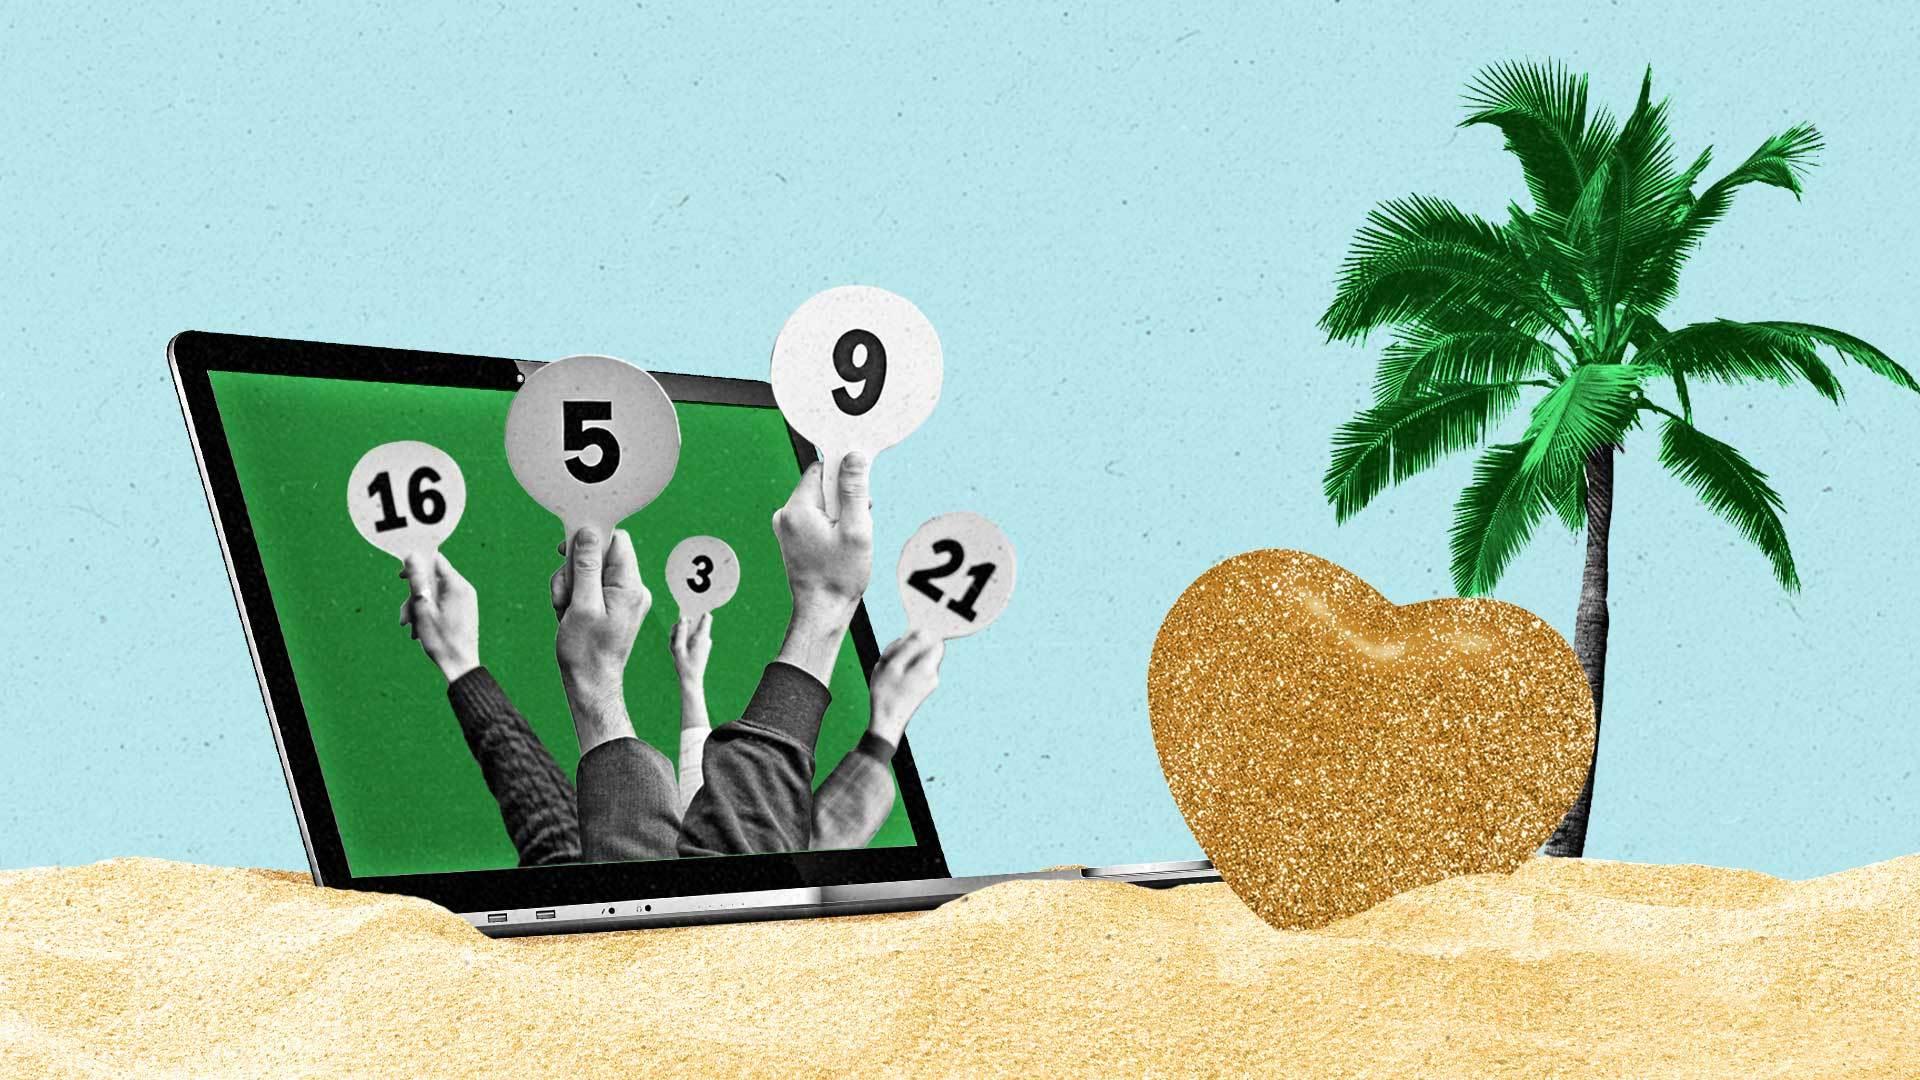 The hands of bidders rise out of the screen of a laptop on the beach as a glittery heart sits in front of it.